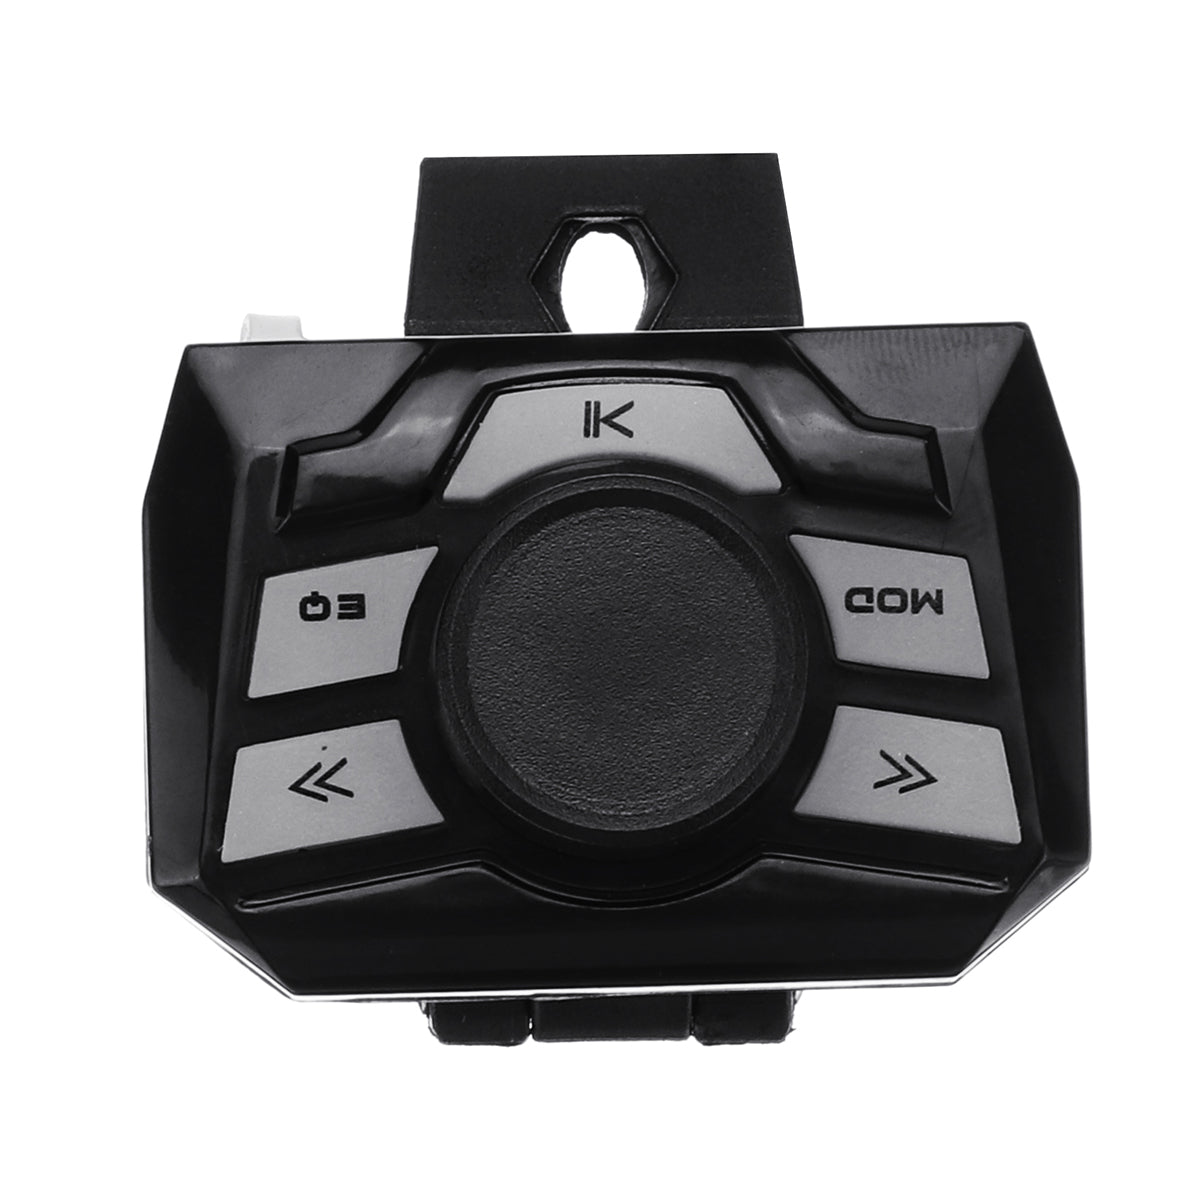 Dark Slate Gray 4 Speaker Amplifier System Remote Control Audio with bluetooth Function For ATV Motorcycle